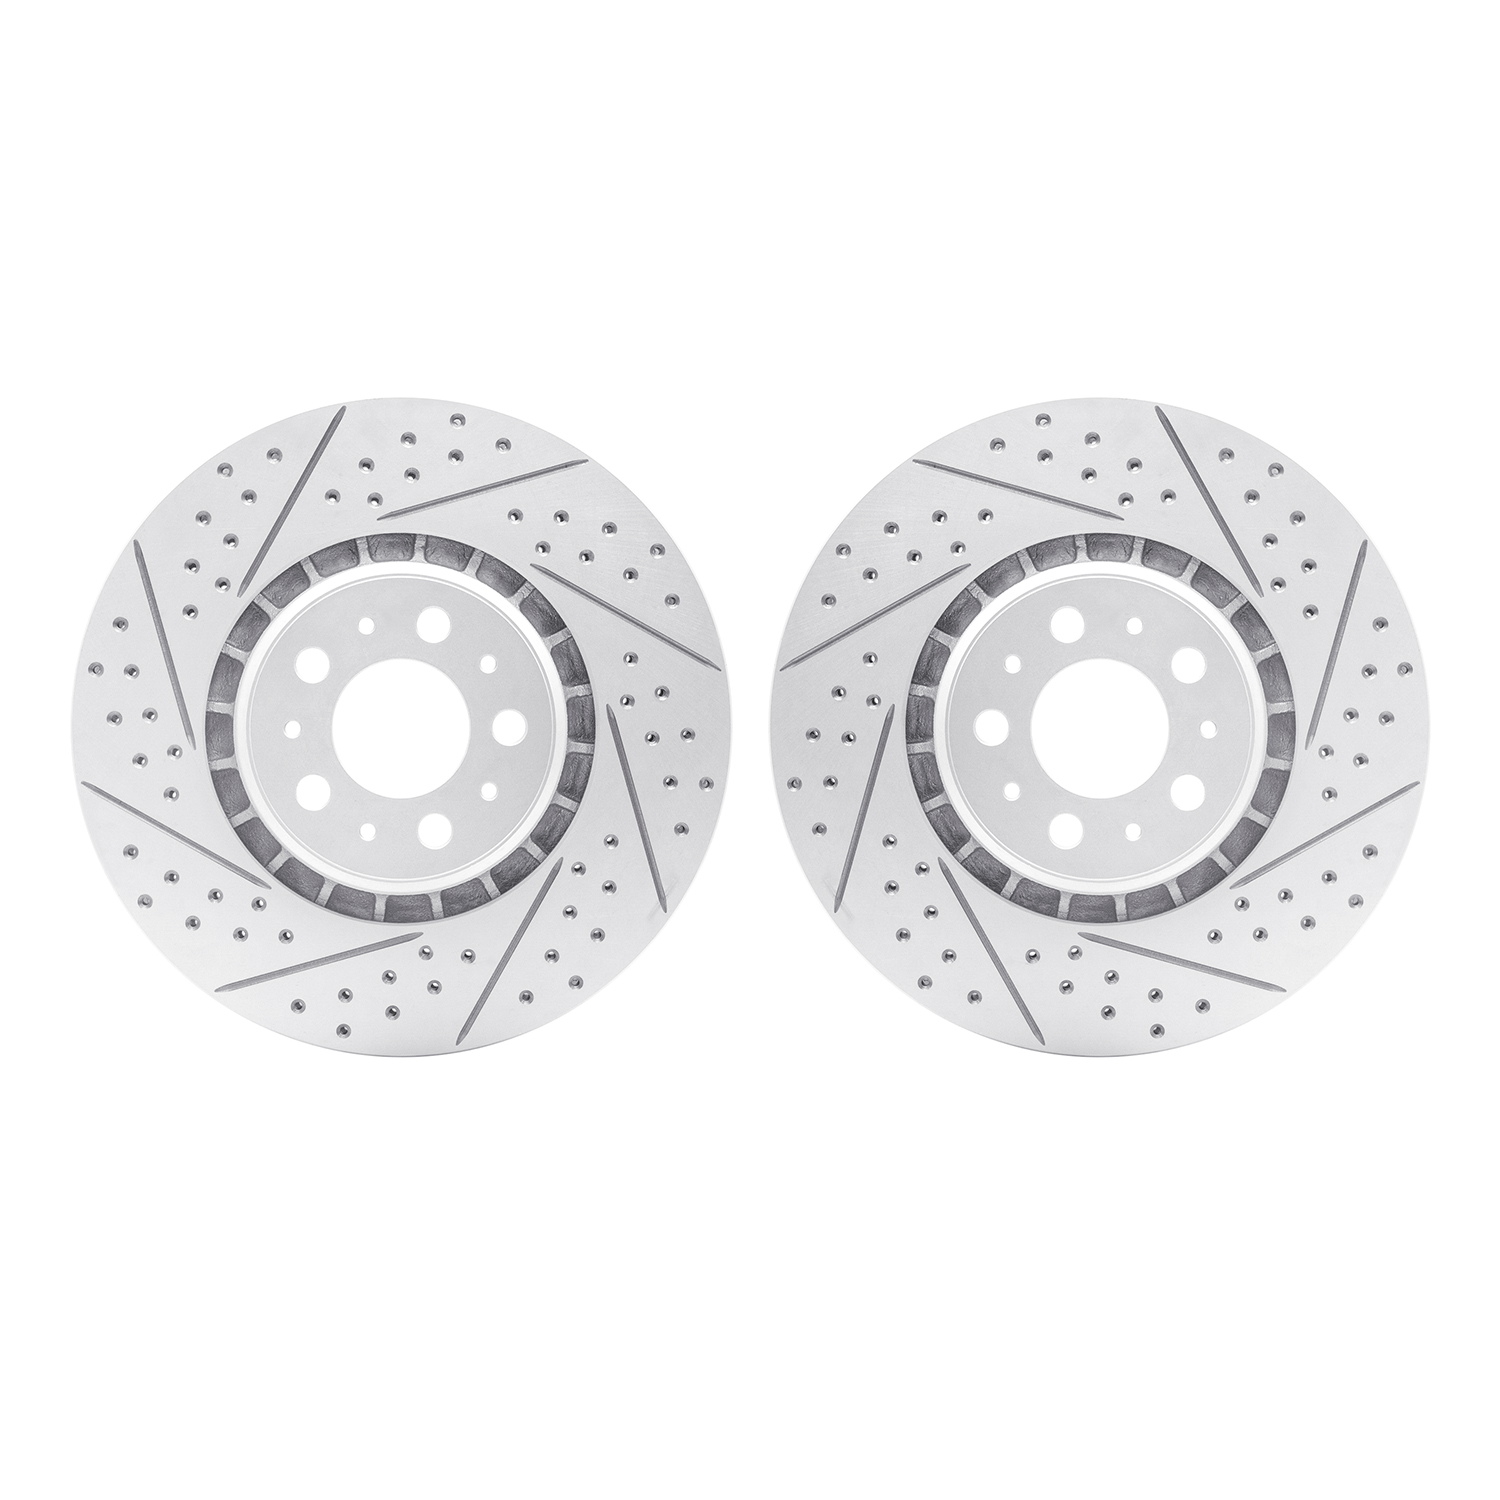 2002-27019 Geoperformance Drilled/Slotted Brake Rotors, 2003-2009 Volvo, Position: Front